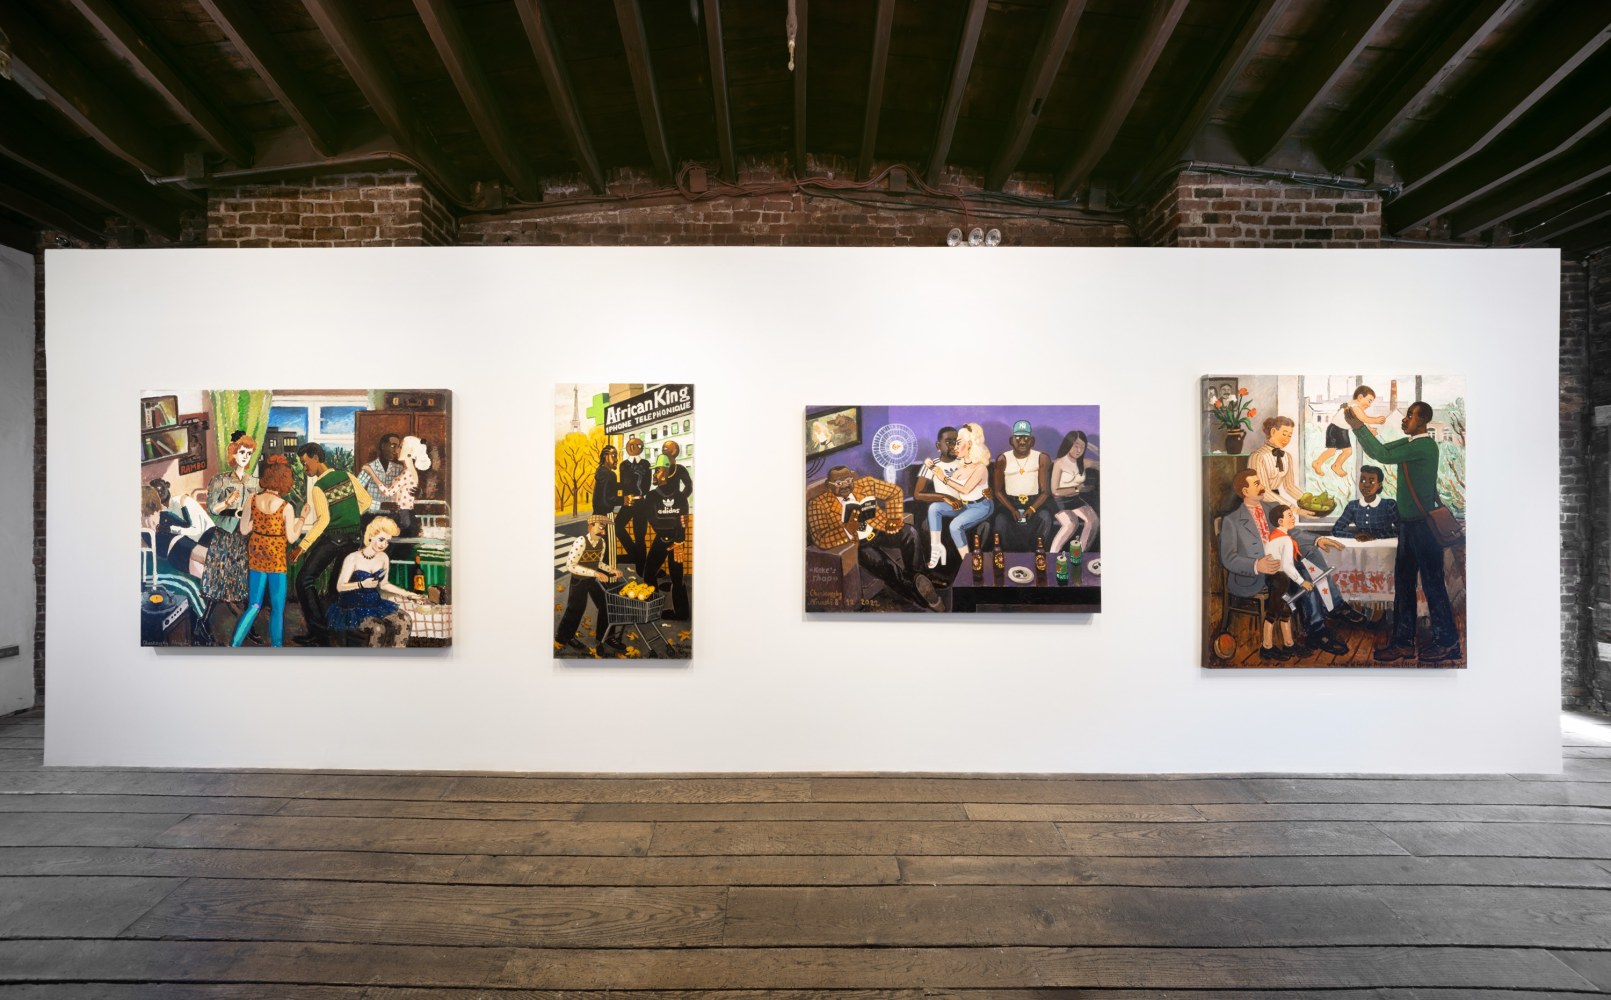 An image of 4 paintings on the second floor of the gallery